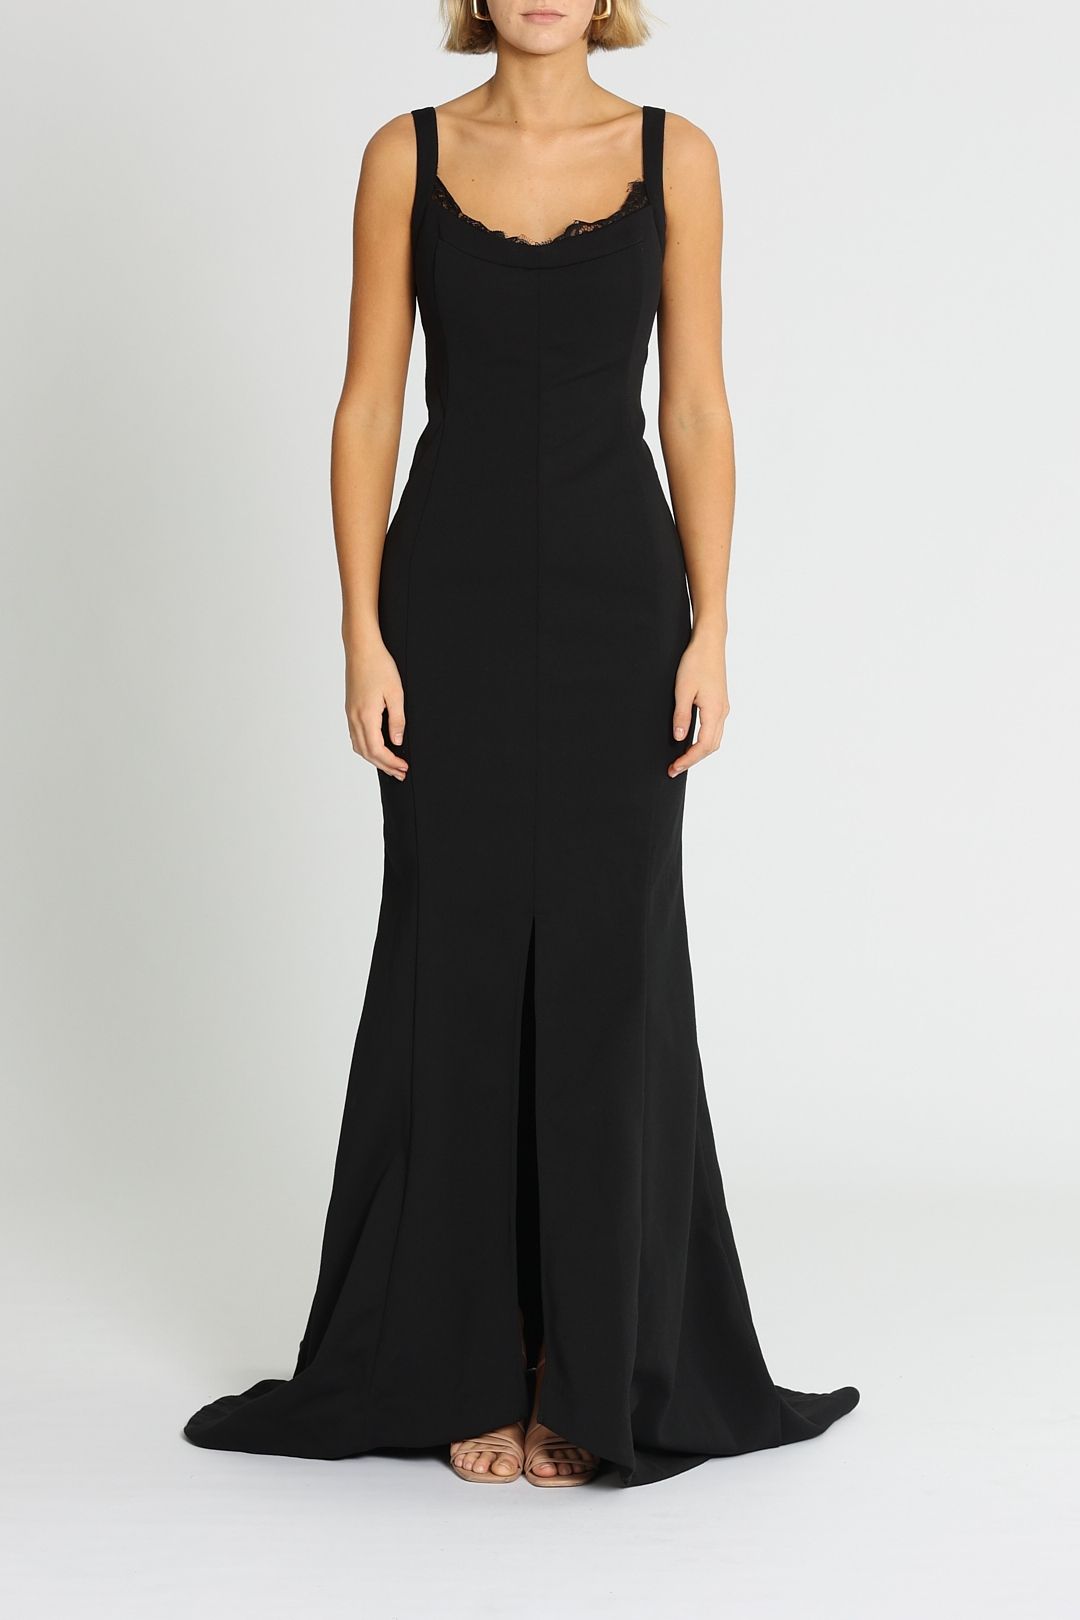 Grace and Hart Calliope Gown Black